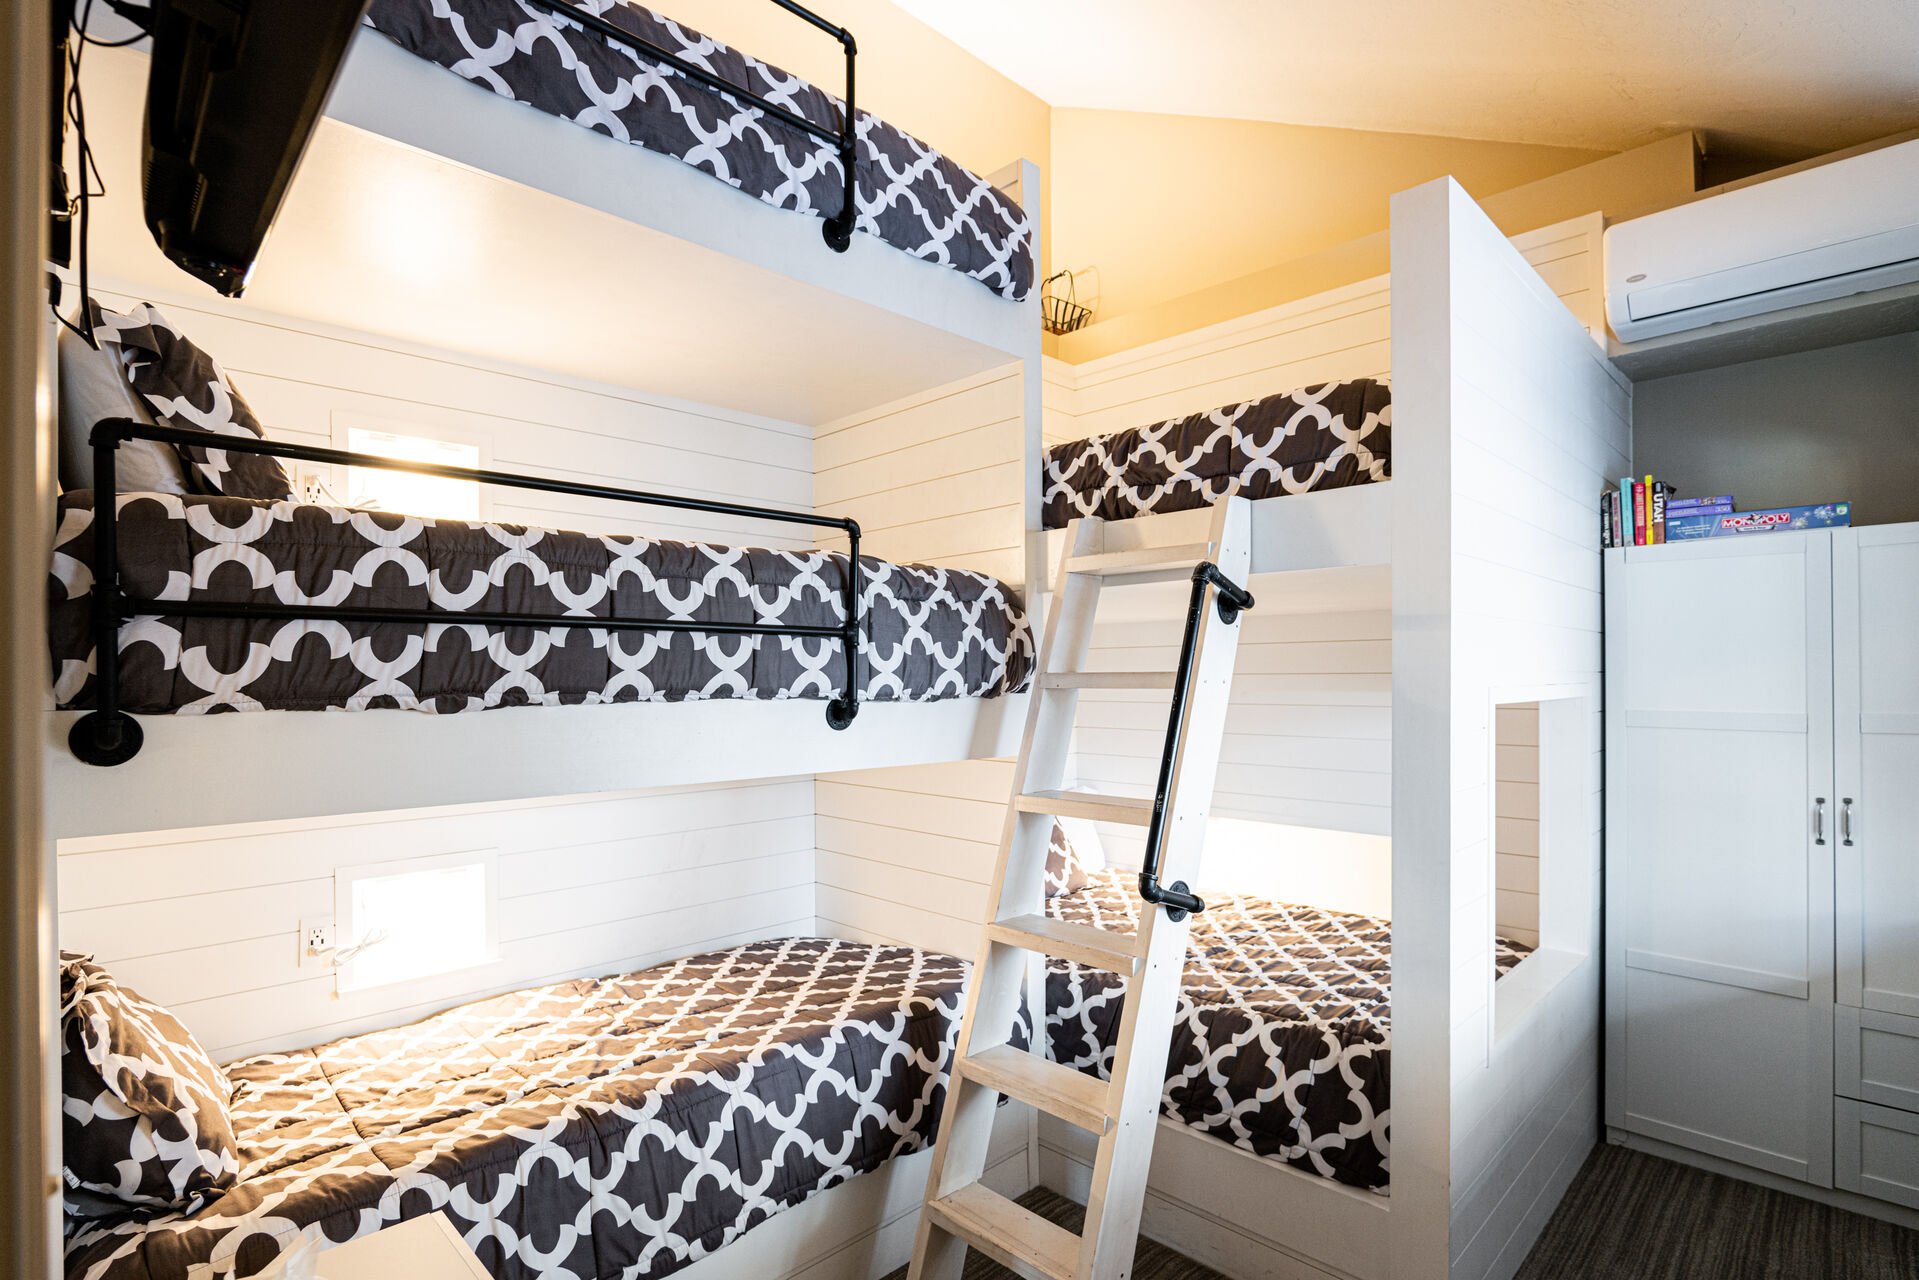 Bedroom 2 with New Custom Bunk Beds - Full over Full and Triple Twins - New A/C Walt Mount Unit